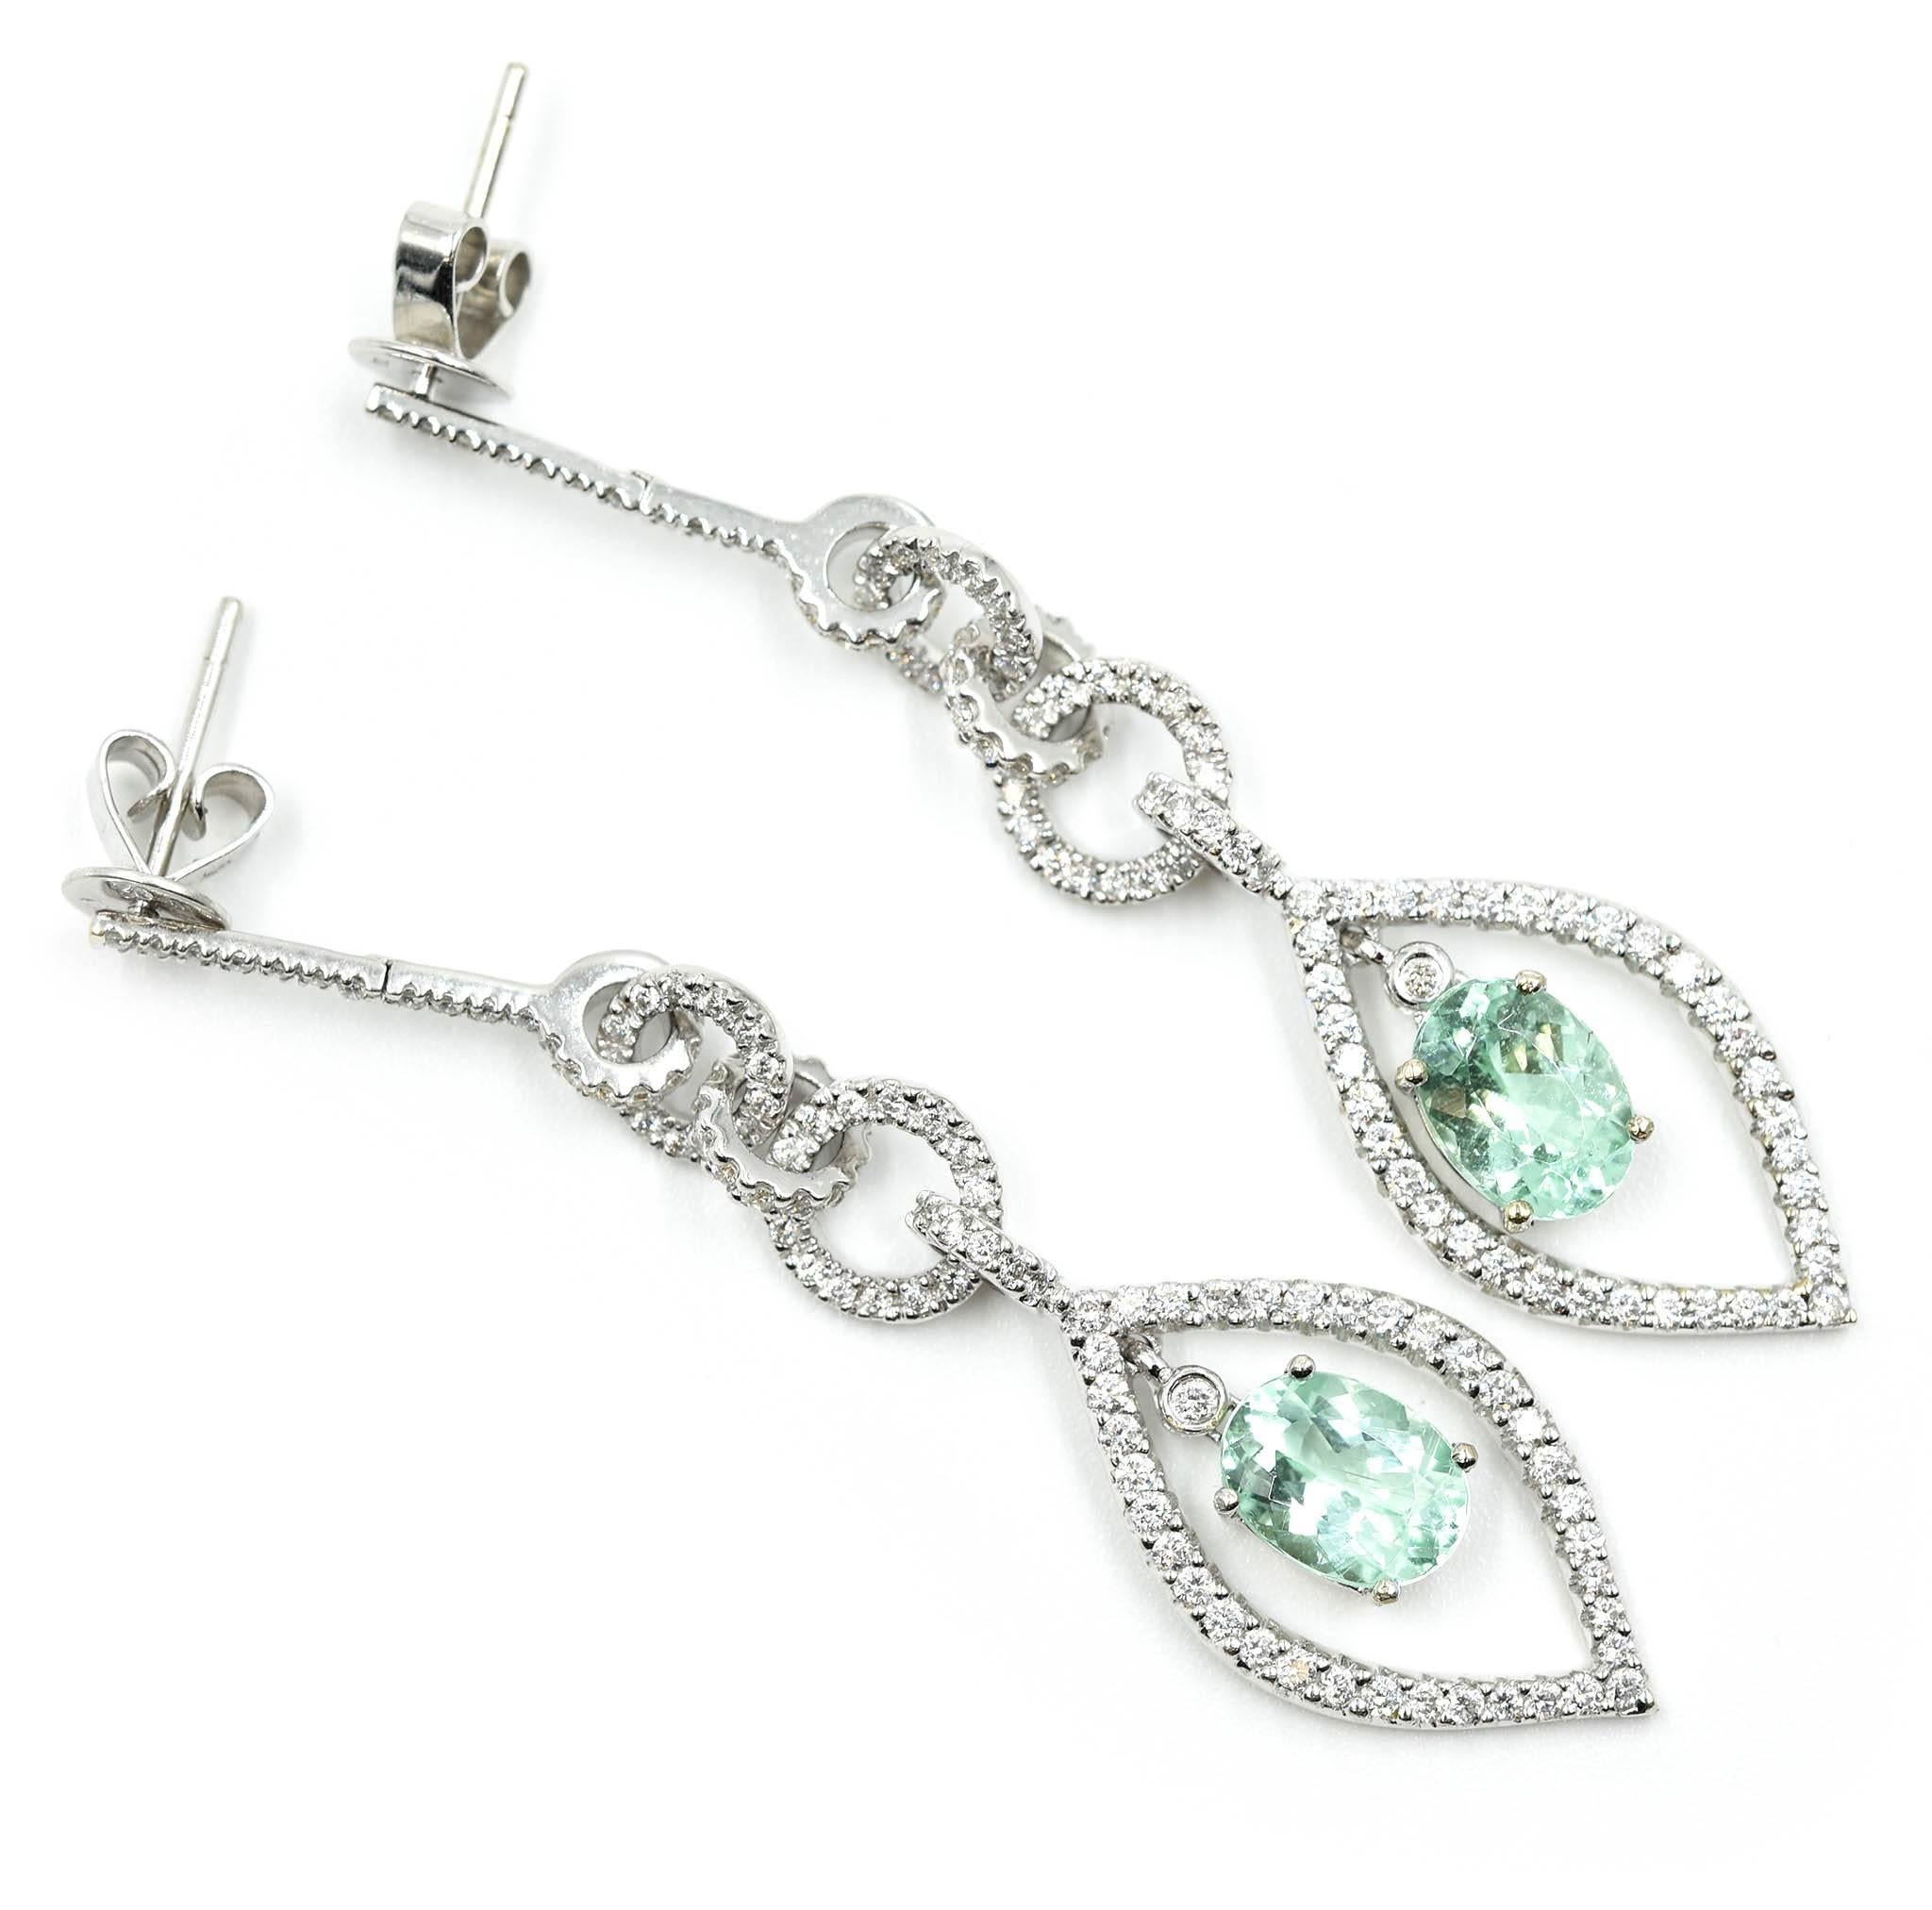 This pair of earrings is made in 18k white gold. Each earring features one oval-cut Mozambique Paraiba tourmaline that is accented by round diamonds. The tourmalines have a total weight of 2.64 carats, and the diamonds have an additional weight of